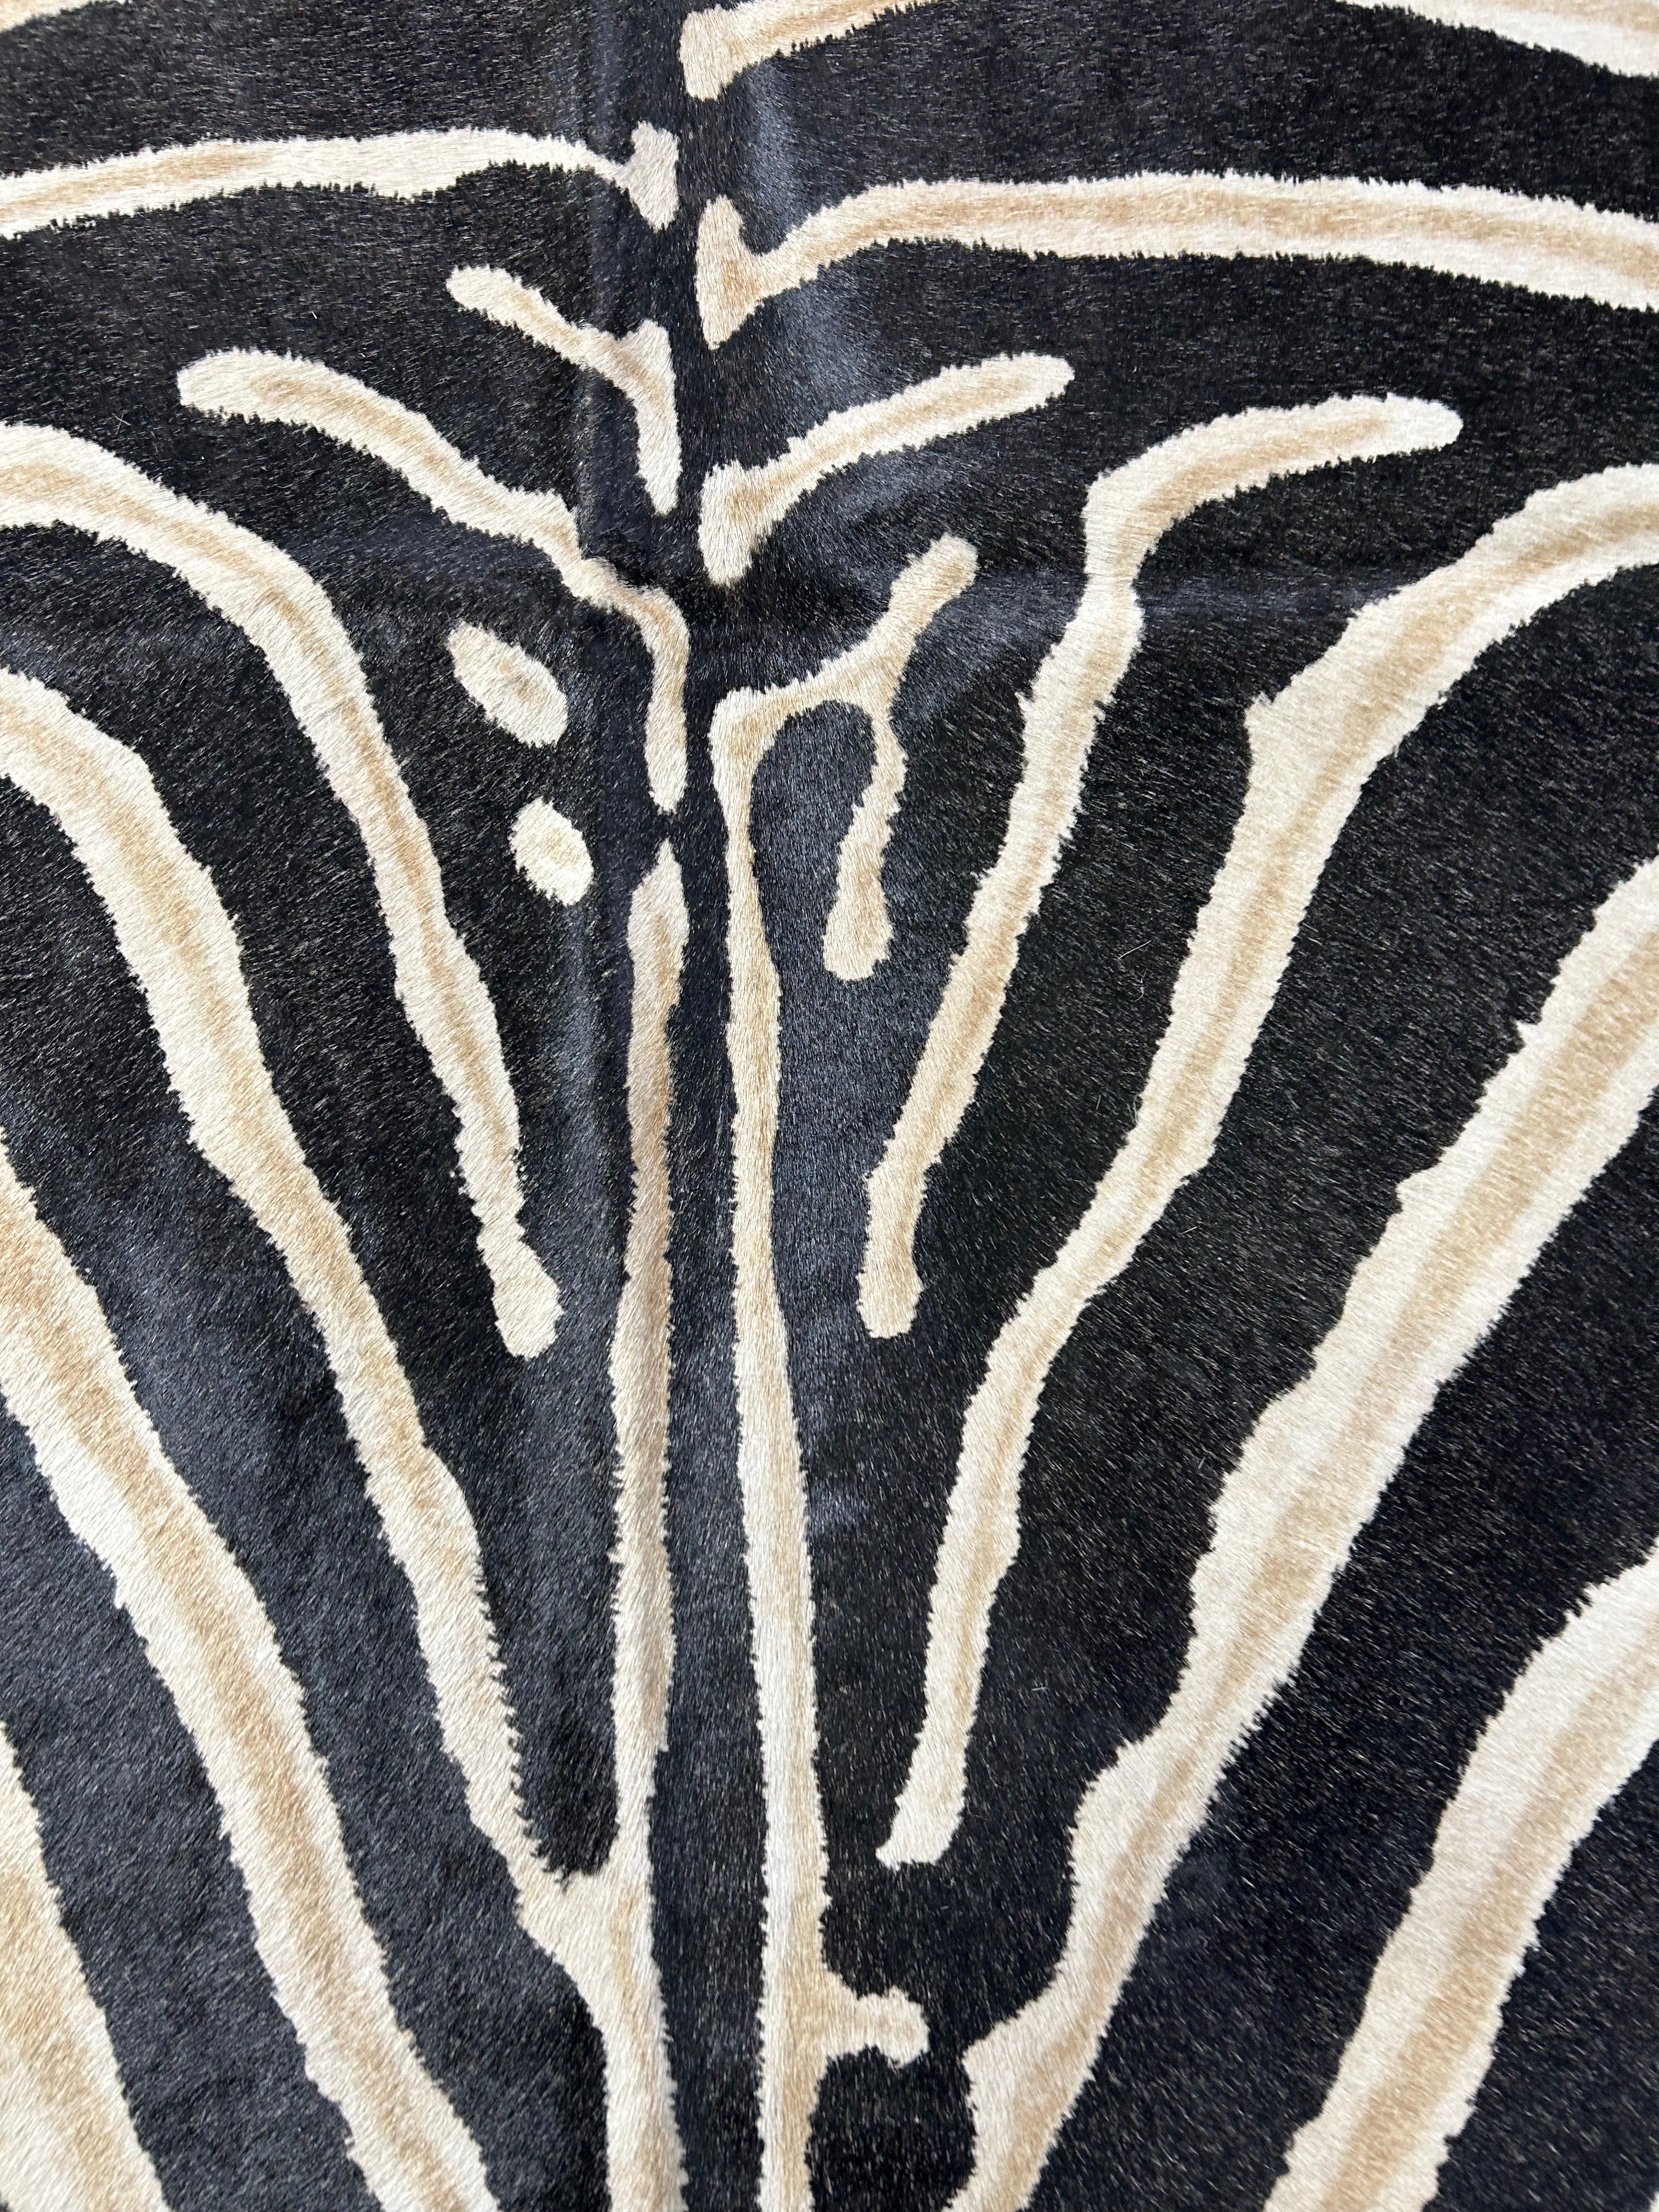 Genuine Zebra Print Cowhide Rug (inner stripes are light brown/black stripes are faded) Size: 7x5.5 feet D-099